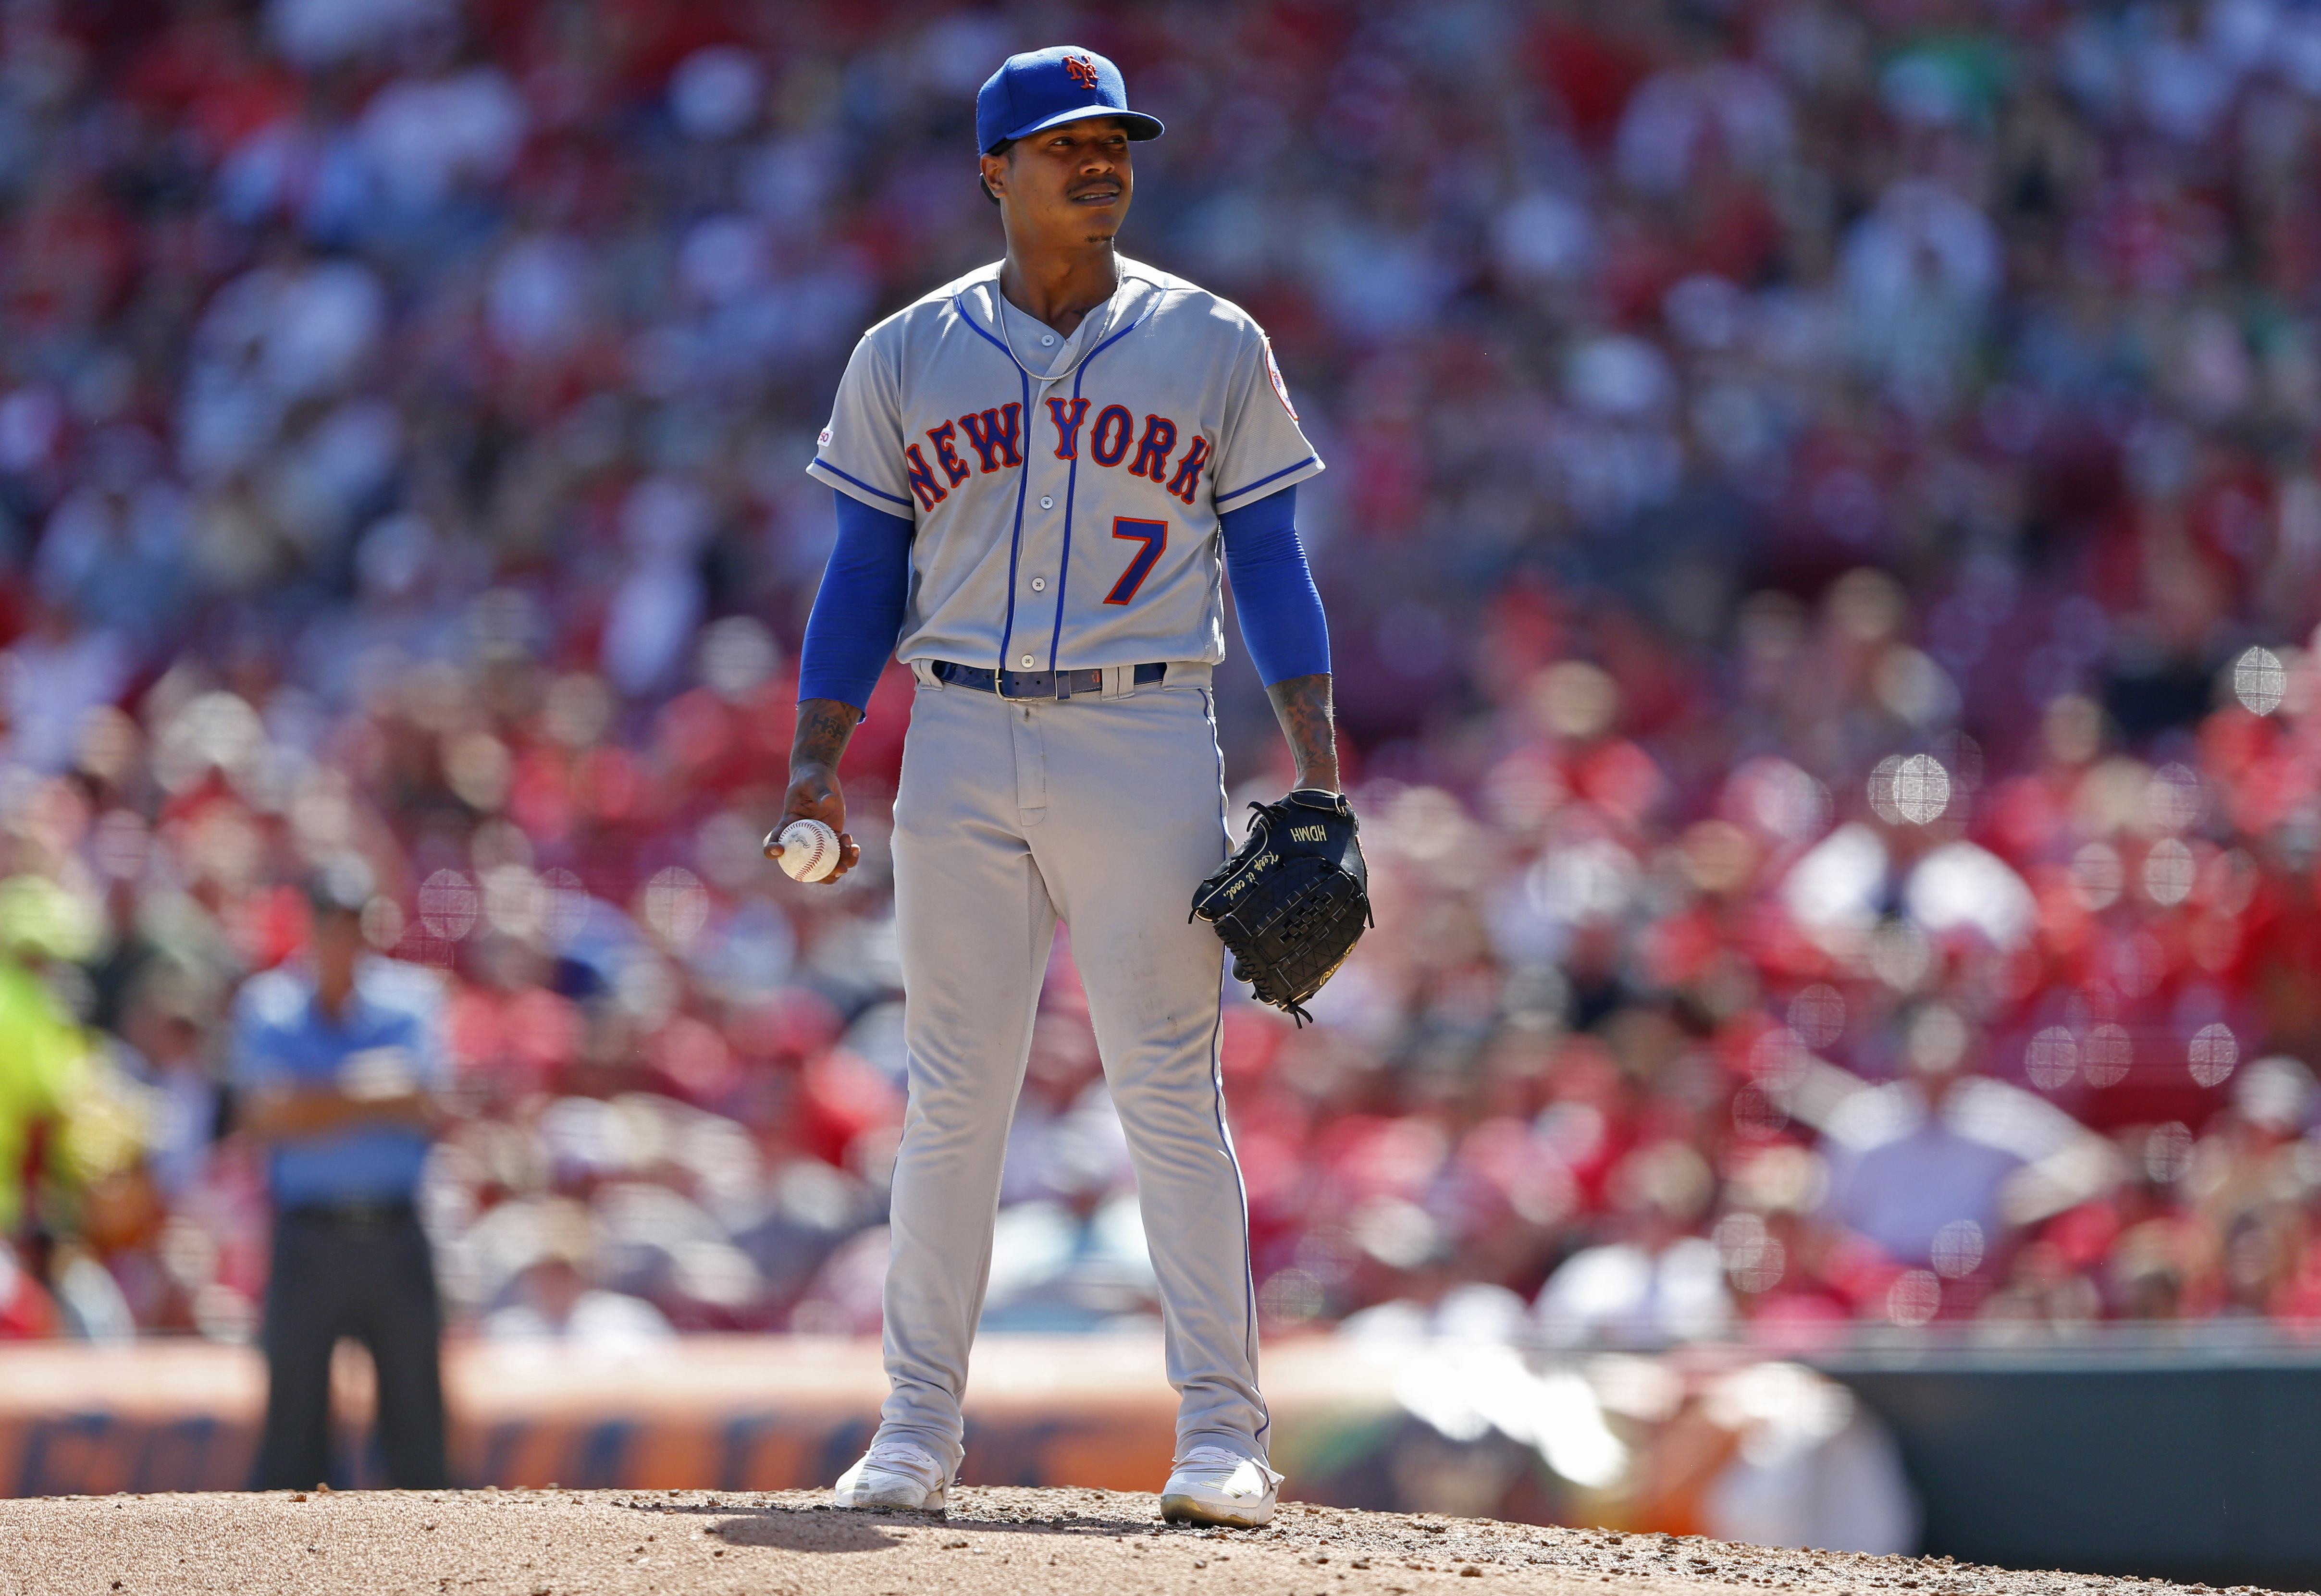 Mets' Marcus Stroman puts together strong start vs. Cardinals